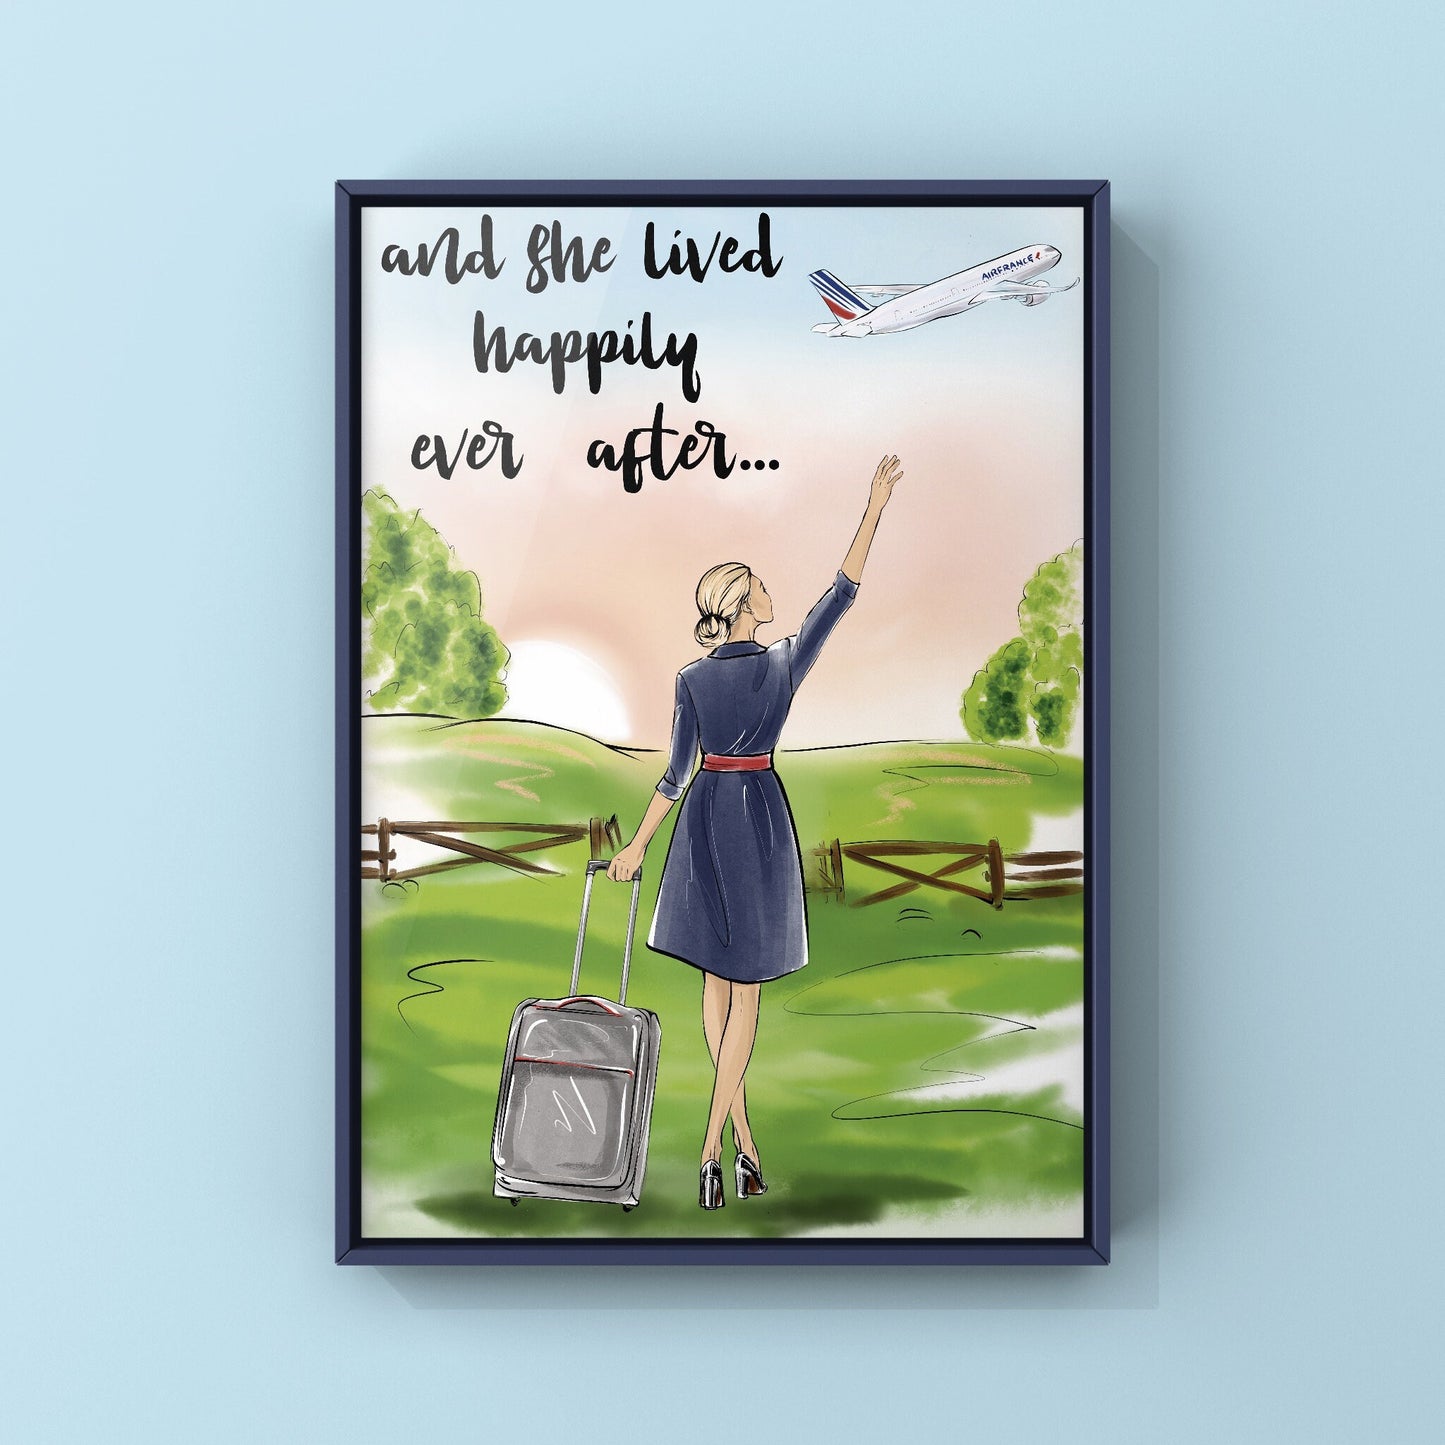 Air France ‘And She Lived Happily Ever’ Cabin Crew Print | Flight Attendant Poster